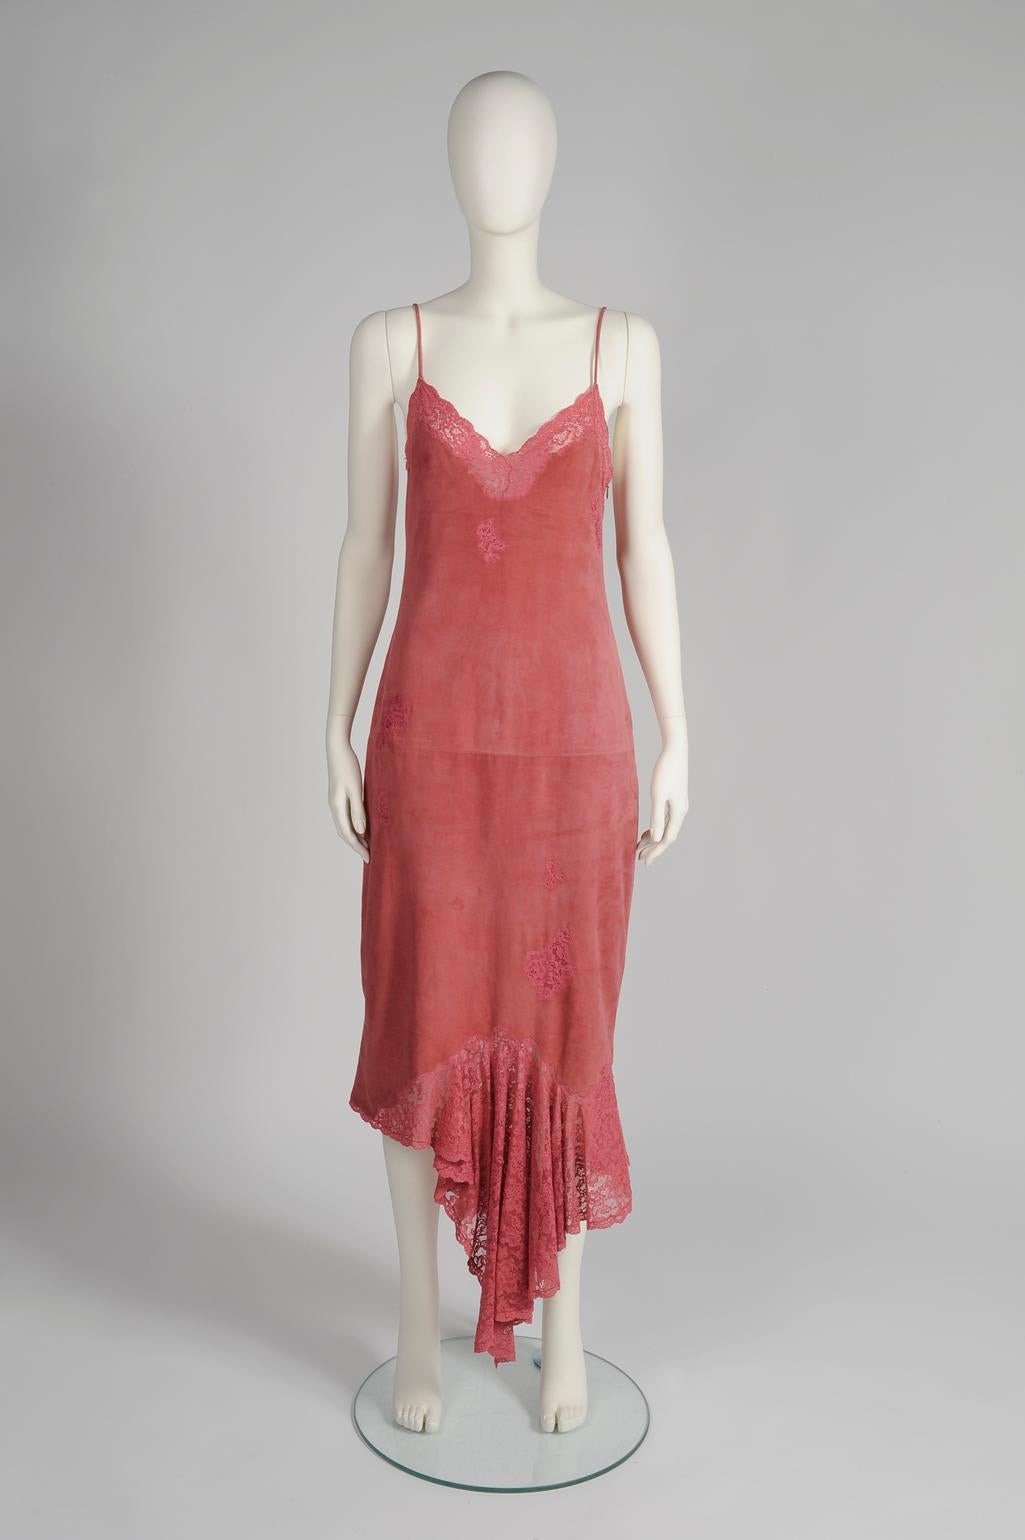 This gown by John Galliano for Dior is the proof that glamour and ease can go hand in hand. Cut from super soft antique rose suede, the dress is embellished with color matching lace. The deep V-neckline, spaghetti straps and low-cut back create the